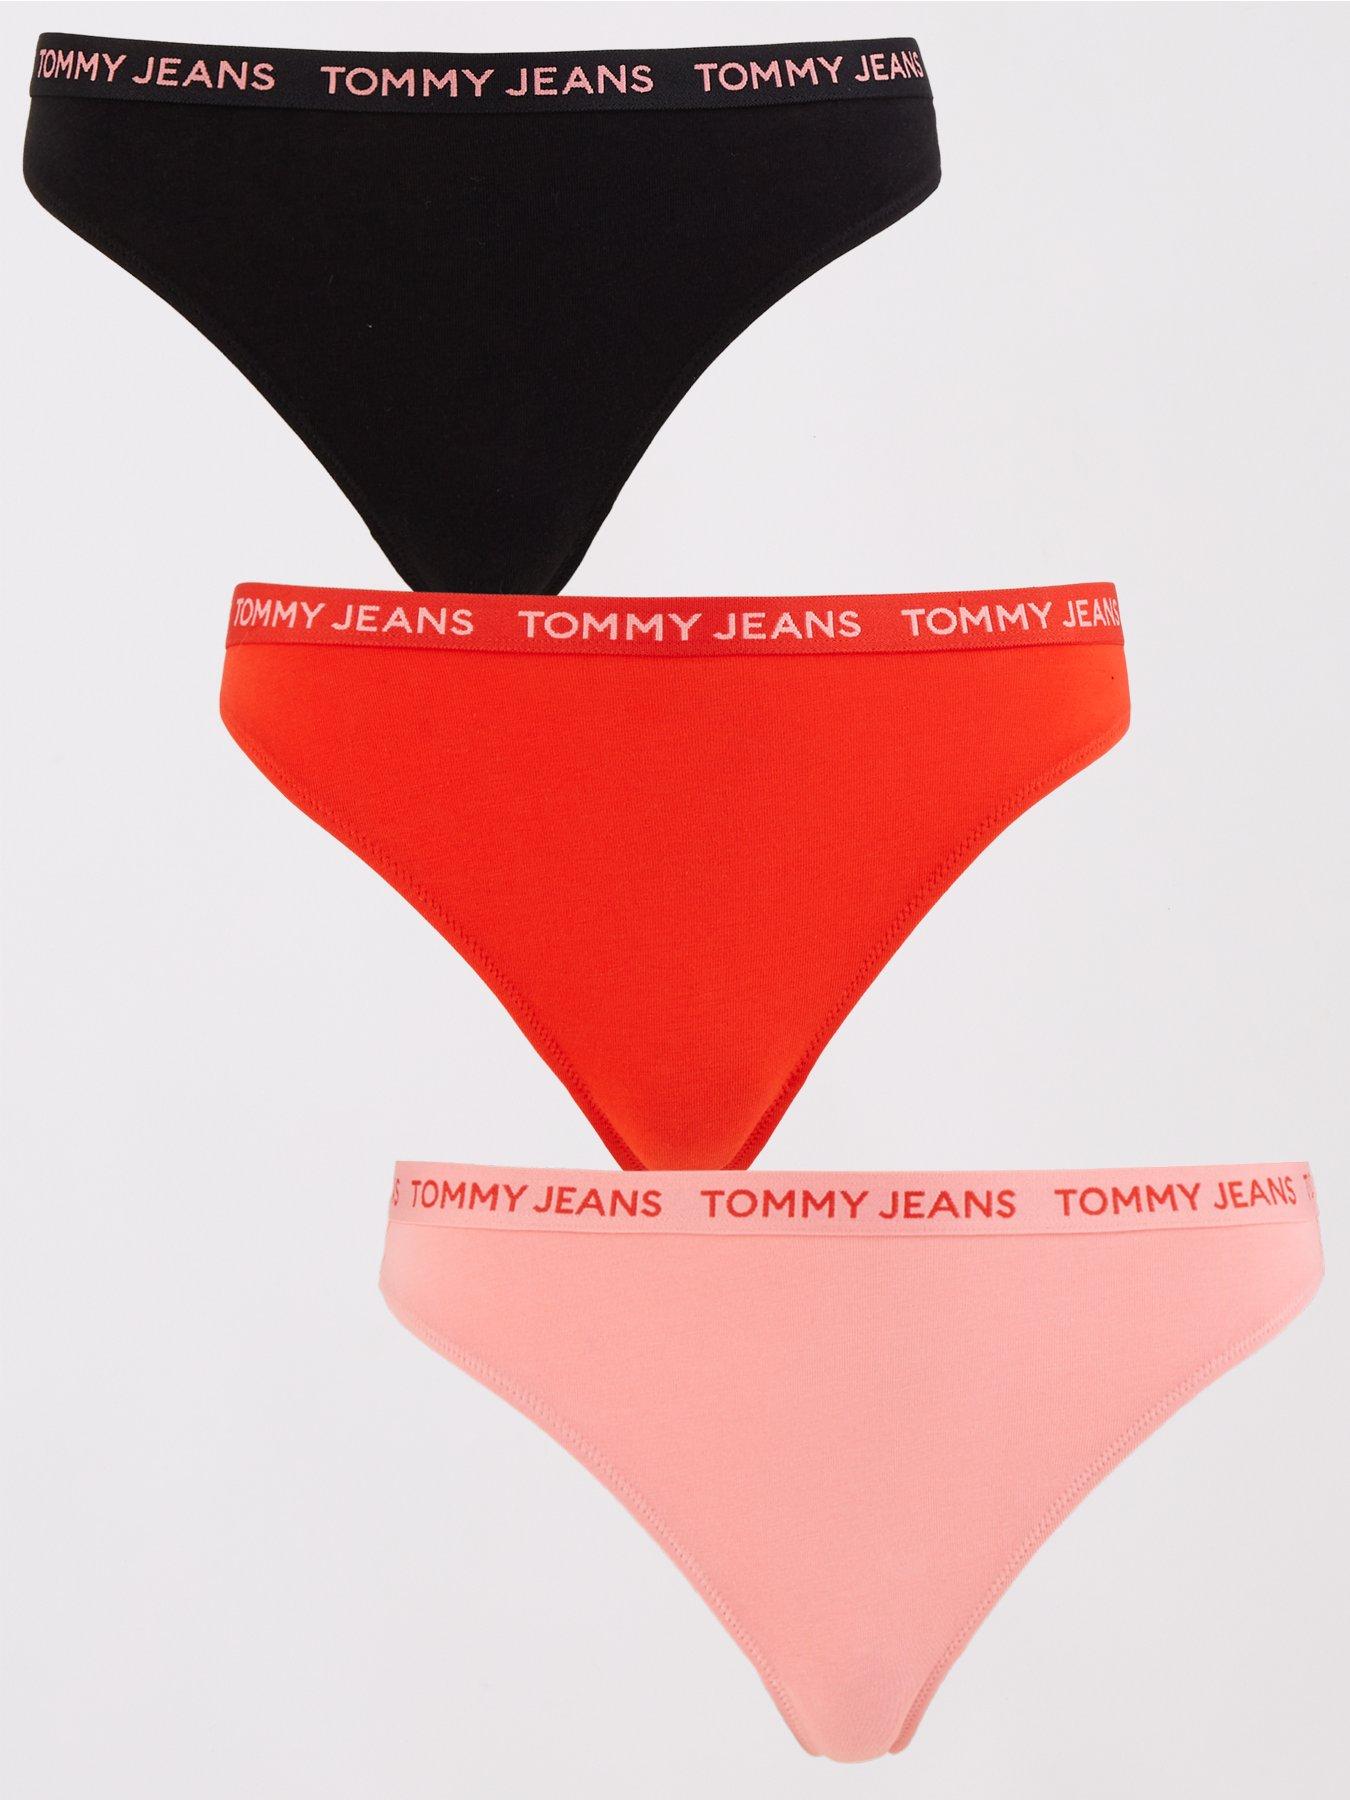  Tommy Hilfiger Women's Cotton Thong Underwear-6 Pack, Heather  Grey/Navy/Red/Grey/Black/Red, S : Clothing, Shoes & Jewelry